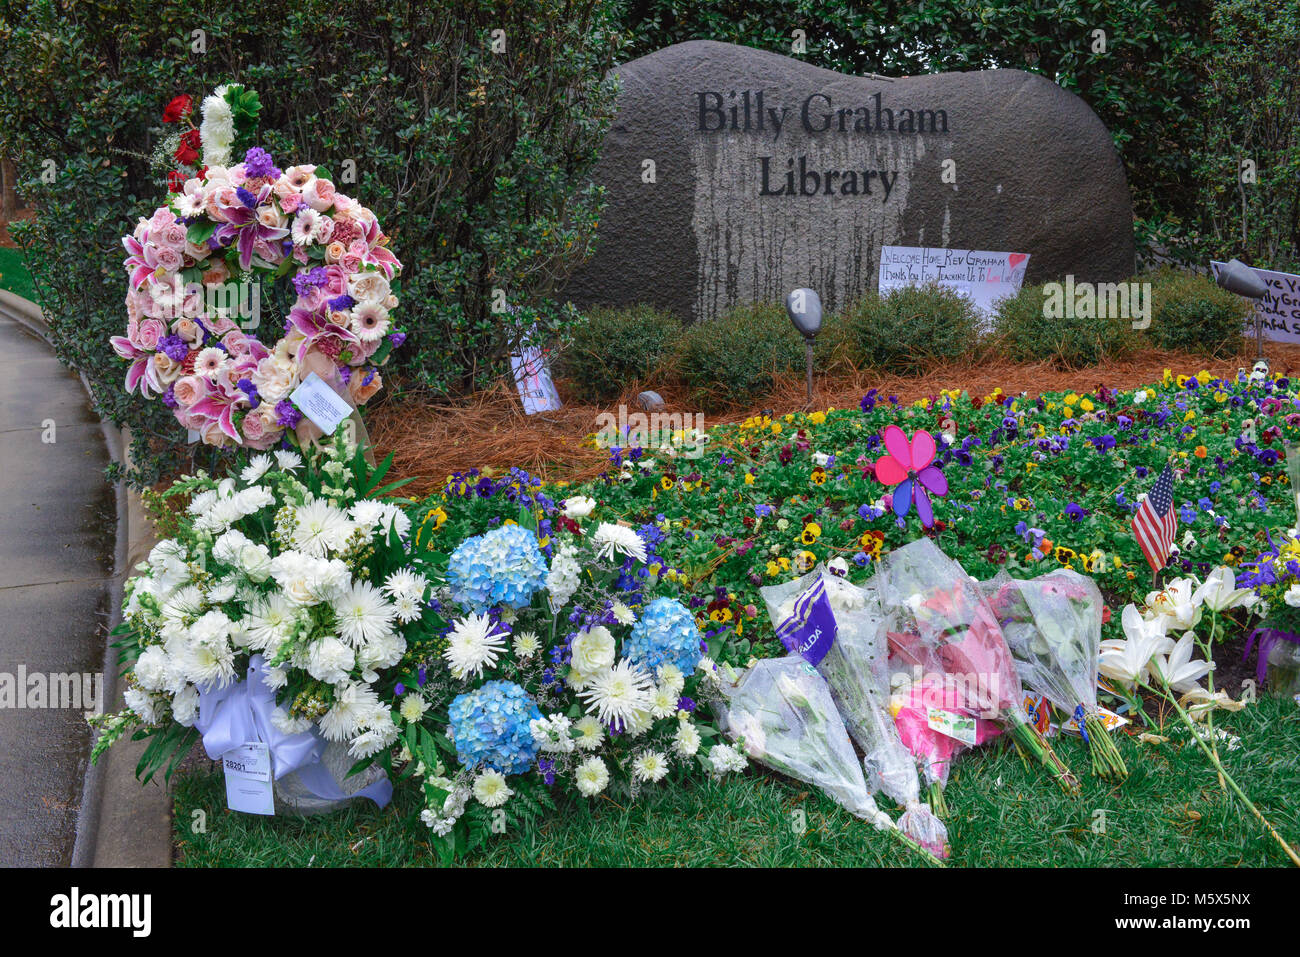 Charlotte, NC, USA. 26 Feb, 2018.  Flowers, cards, & stuffed animals are being left by the public in honor of the late Reverend Billy Graham. Rev. Graham died 21 Feb 2018 at age 99 in his Montreat, NC home. Credit: Castle Light Images / Alamy Live News. Stock Photo